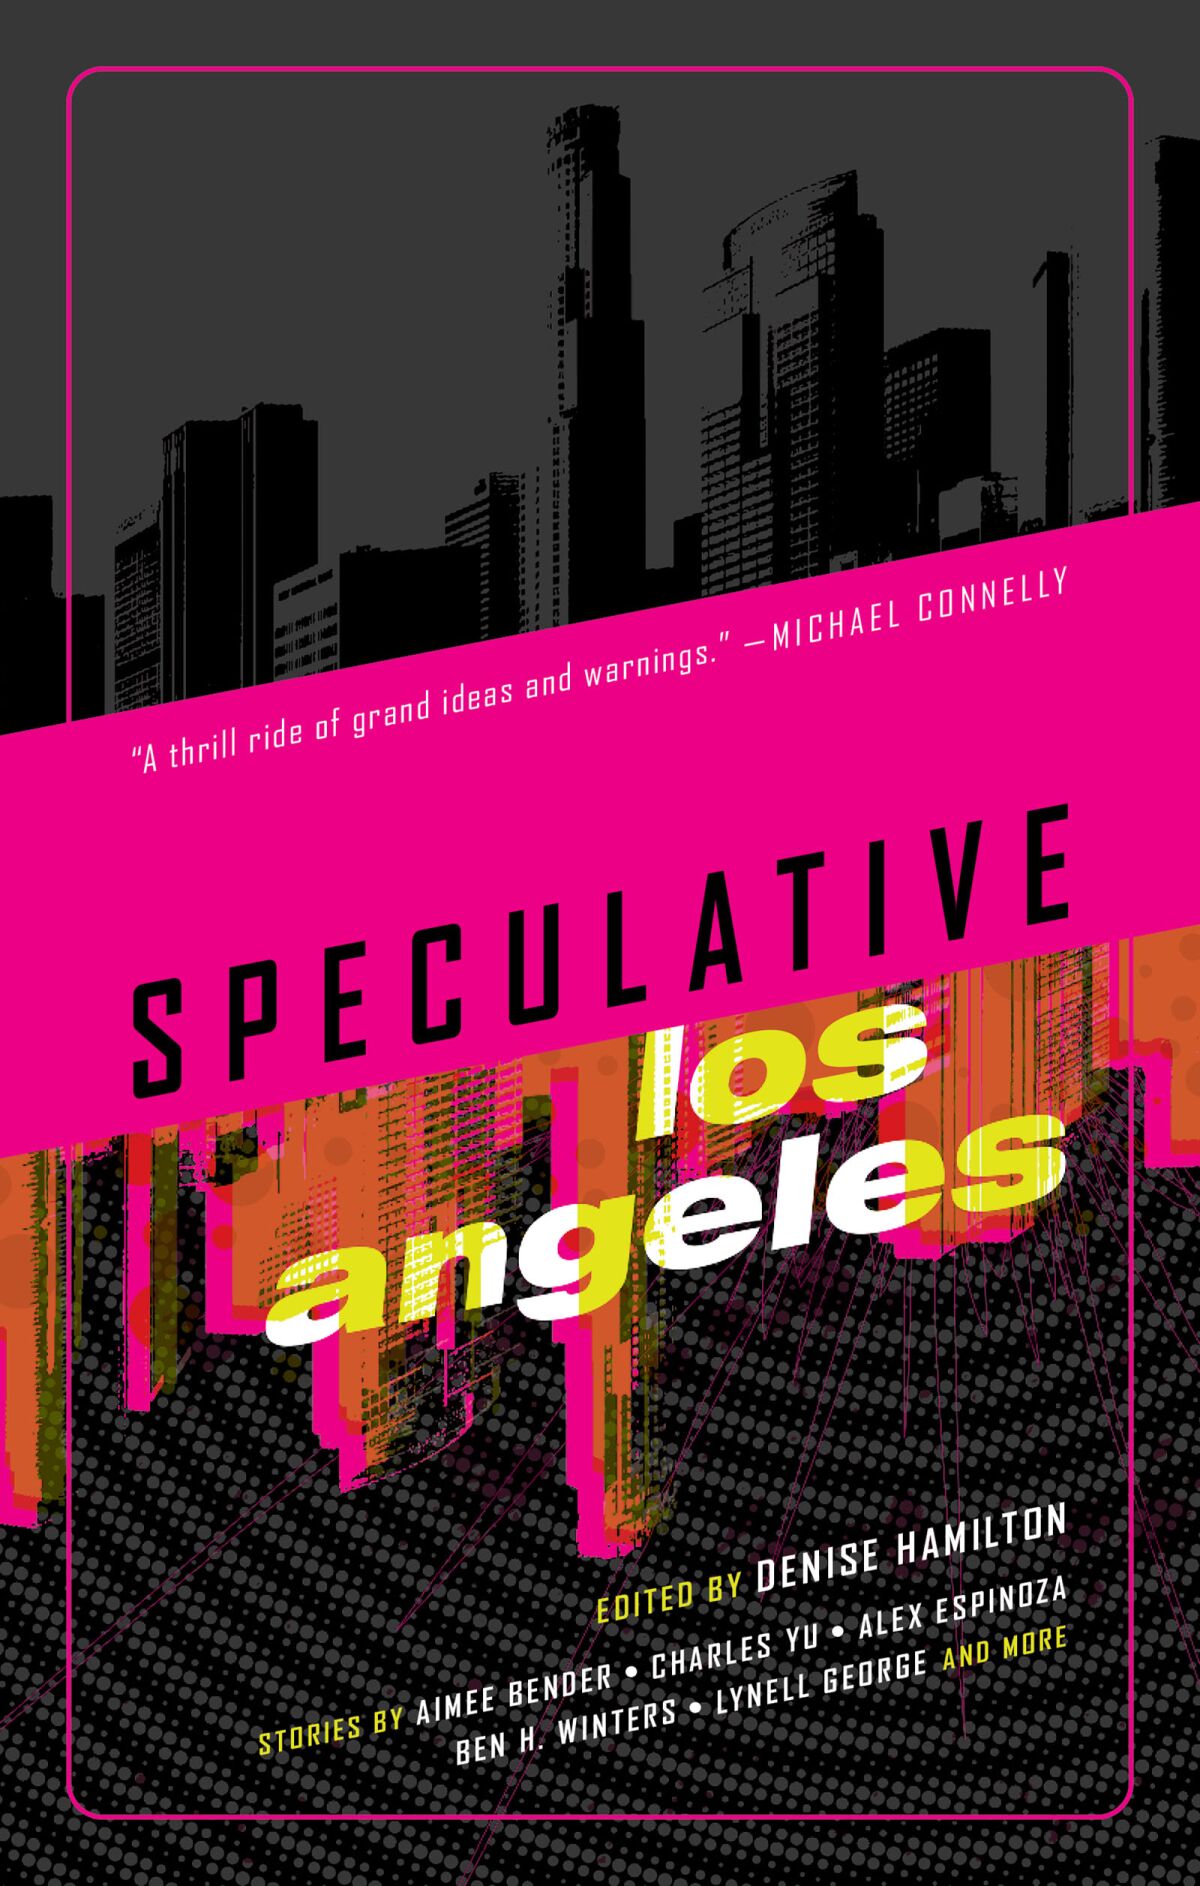 The cover of "Speculative Los Angeles."